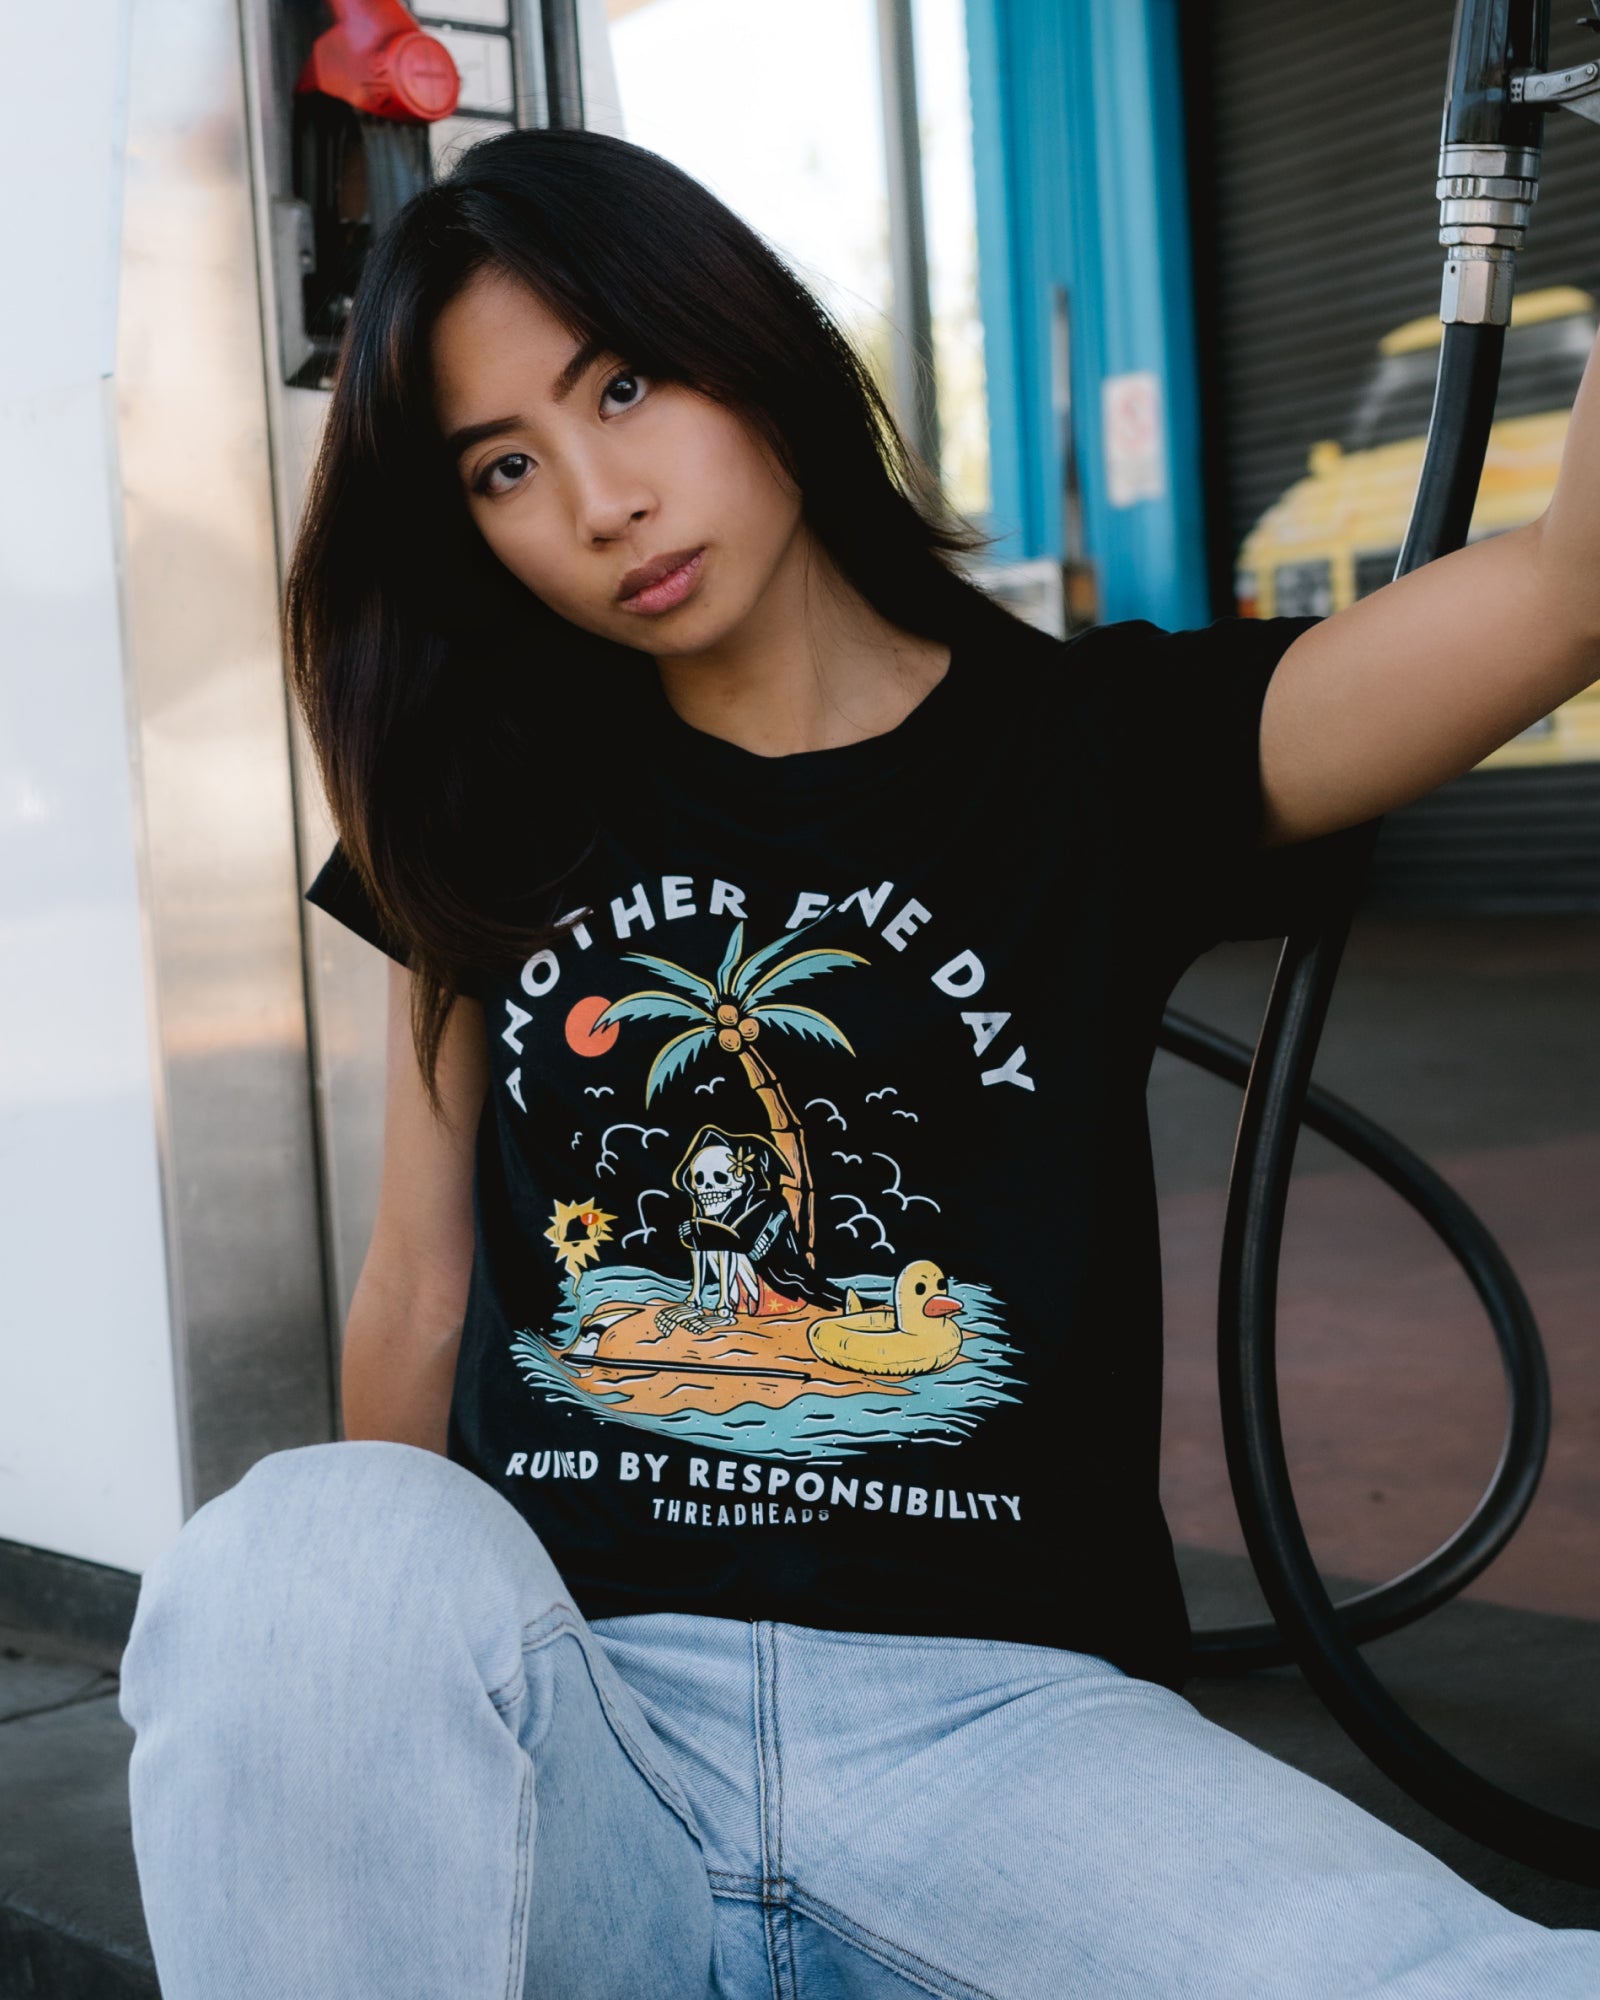 Another Fine Day Ruined by Responsibility T-Shirt Australia Online #colour_black